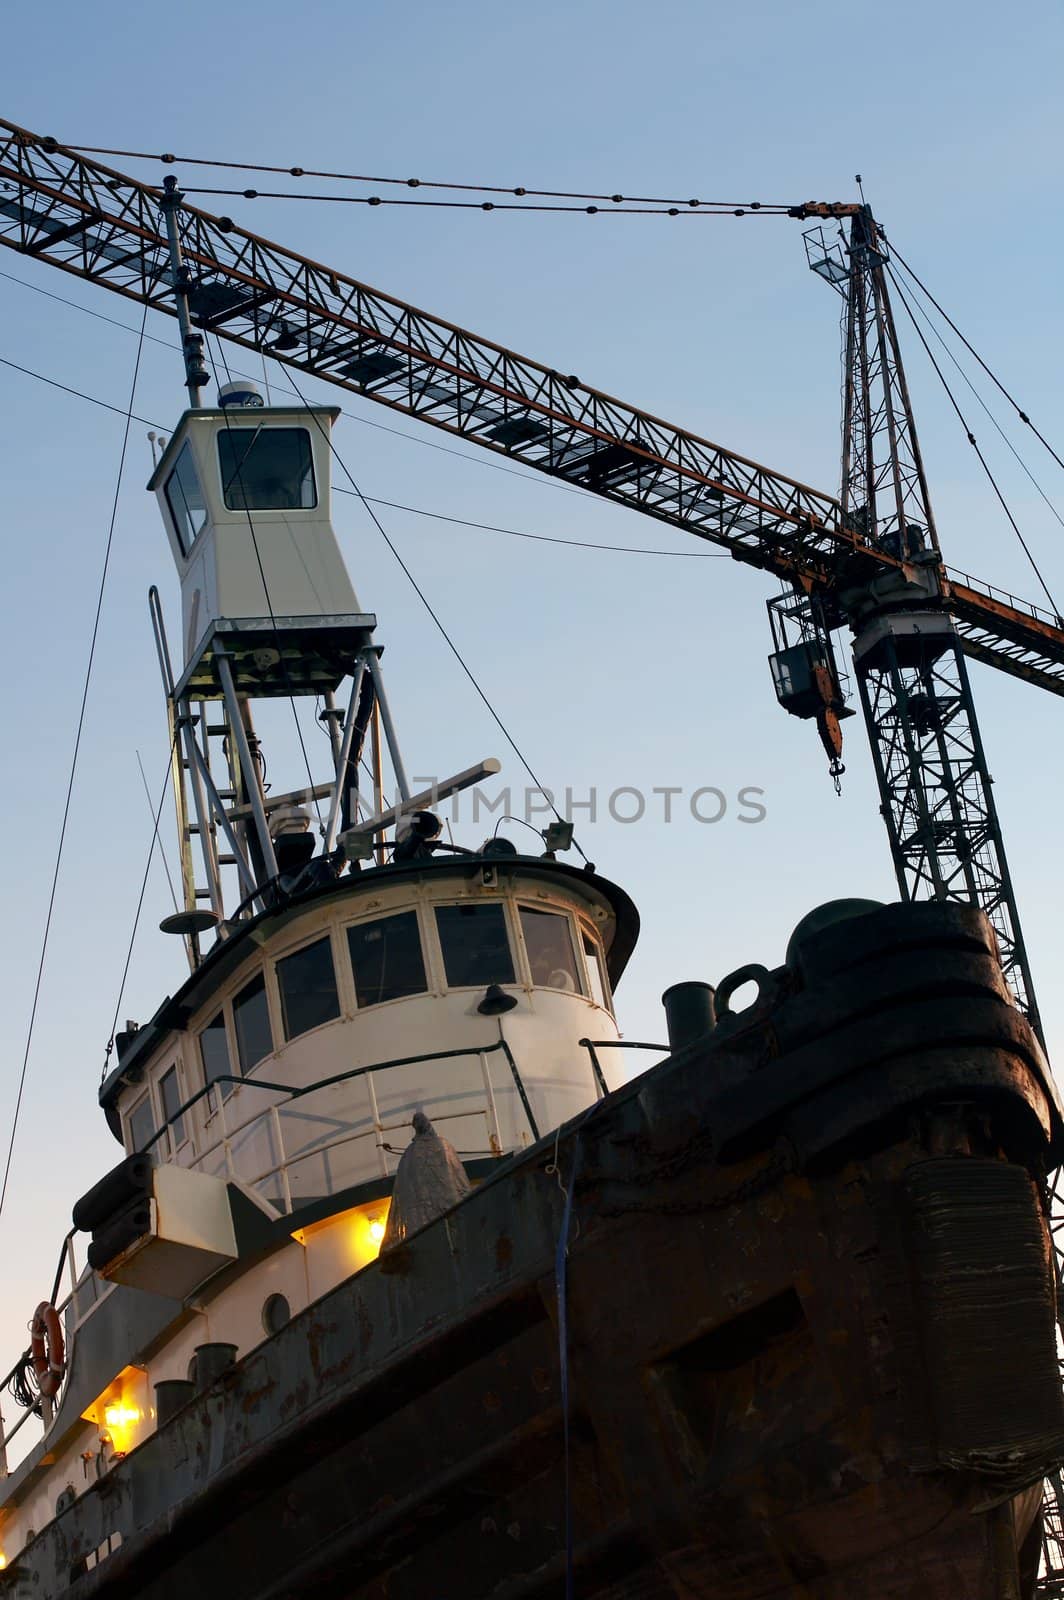 a picture of tugboat in a drydock